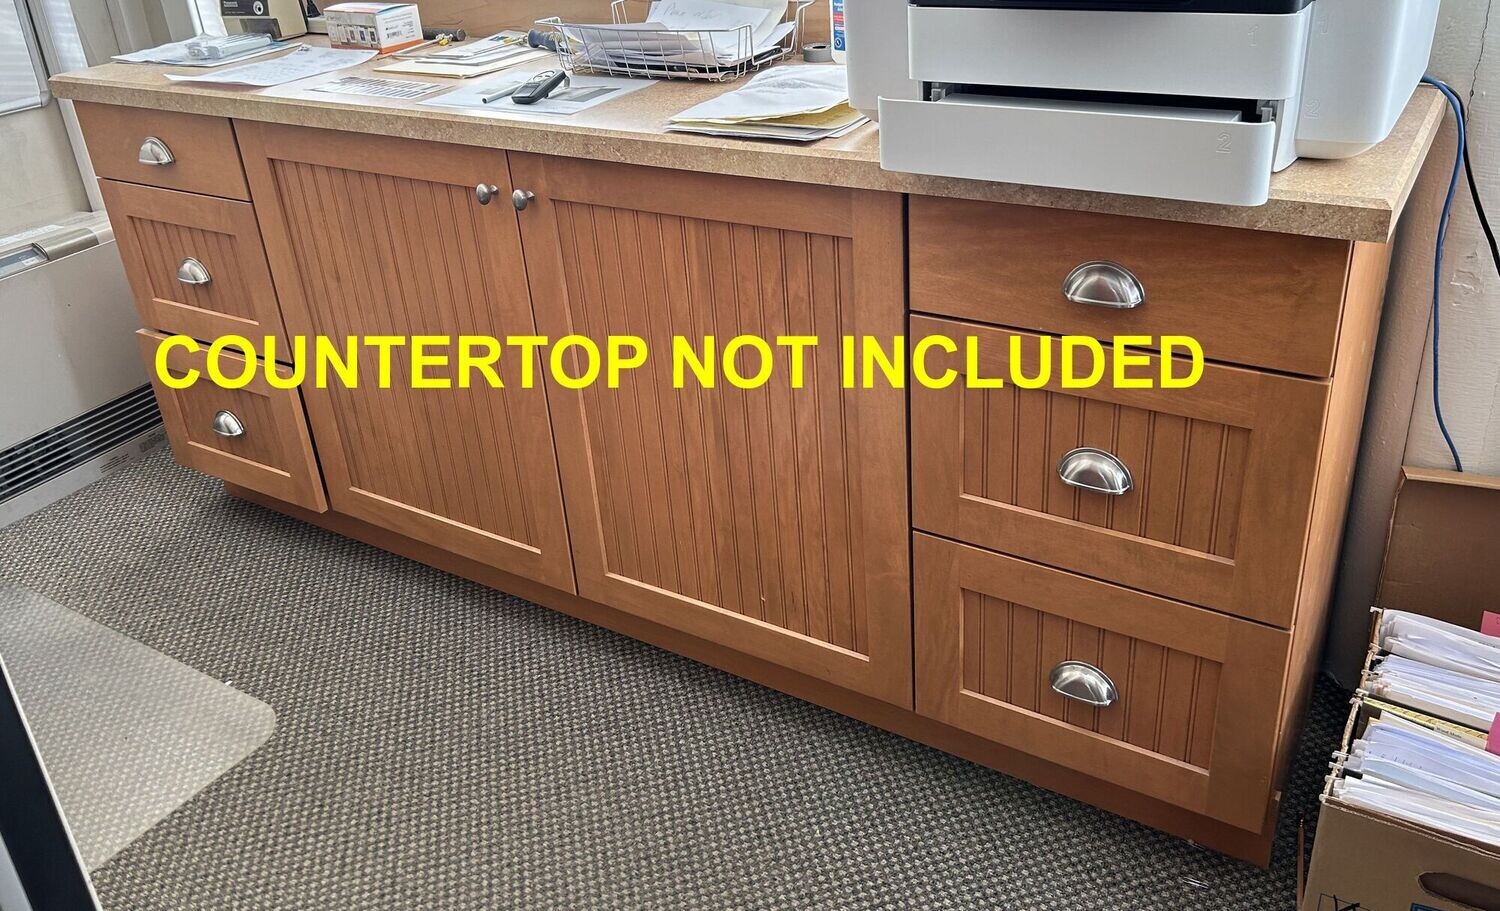 "Beadboard" Base Cabinets, 7 ft length, multi-use, solid wood, soft close (36-38) #1267, 1048 ** 10 days to sell, full price